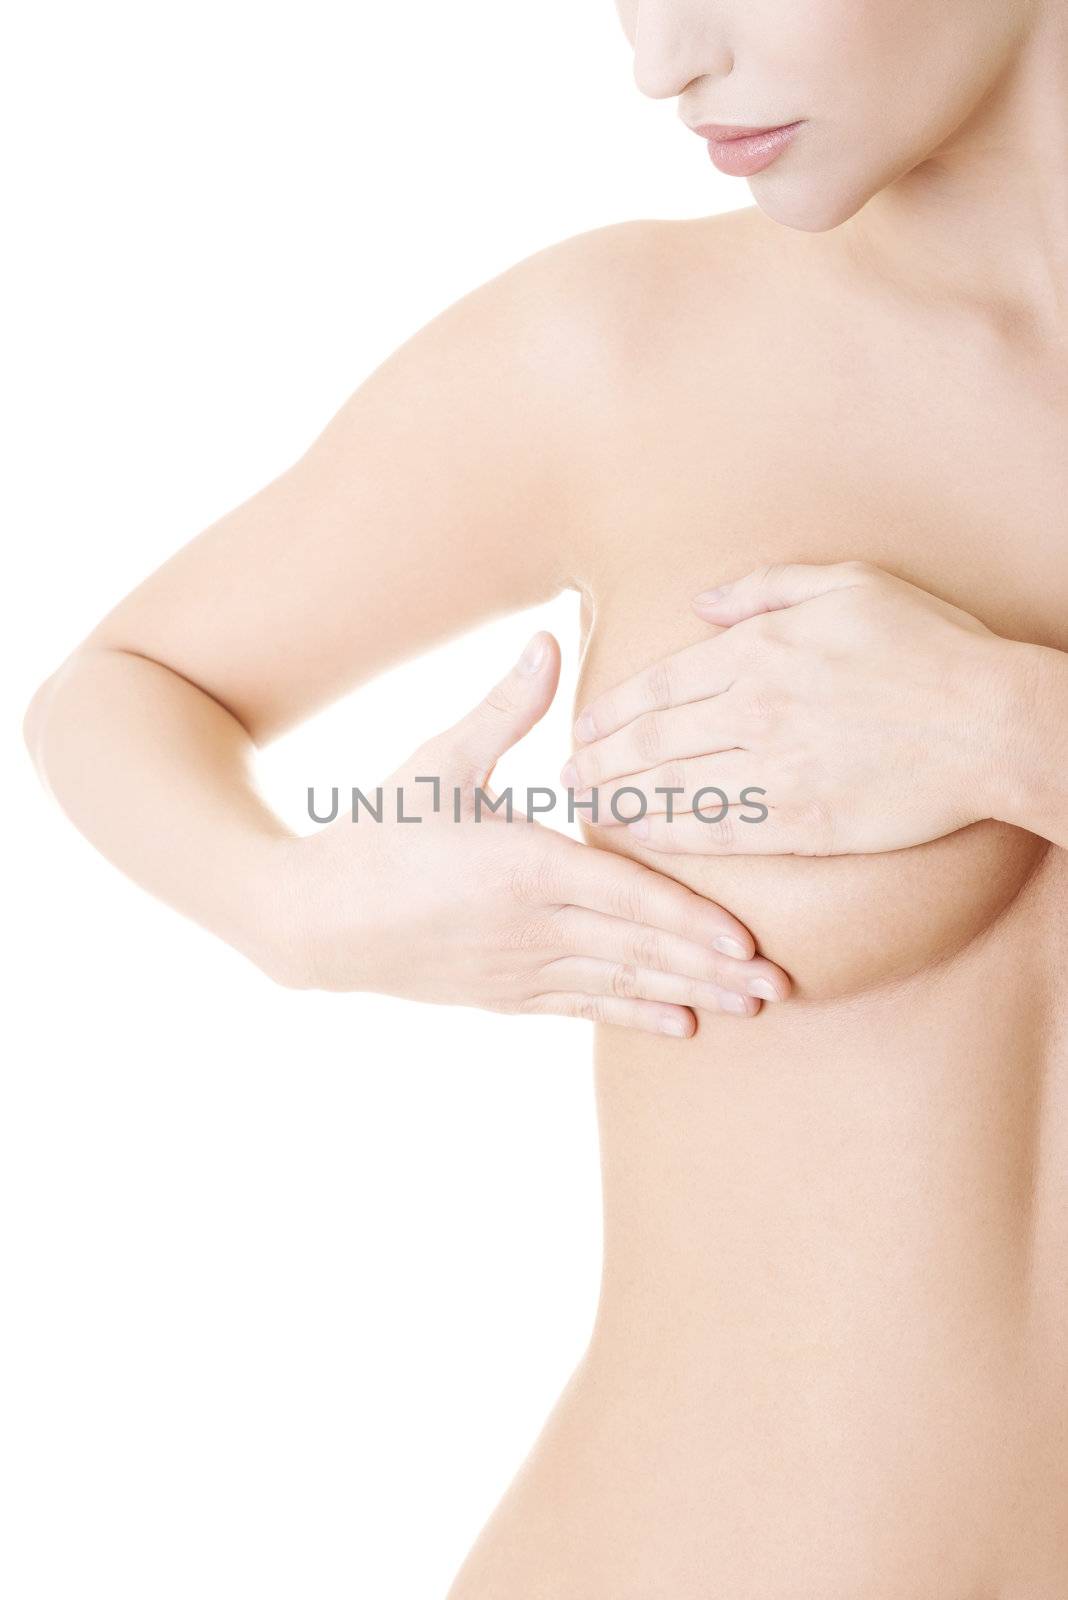 Caucasian adult woman examining her breast by BDS